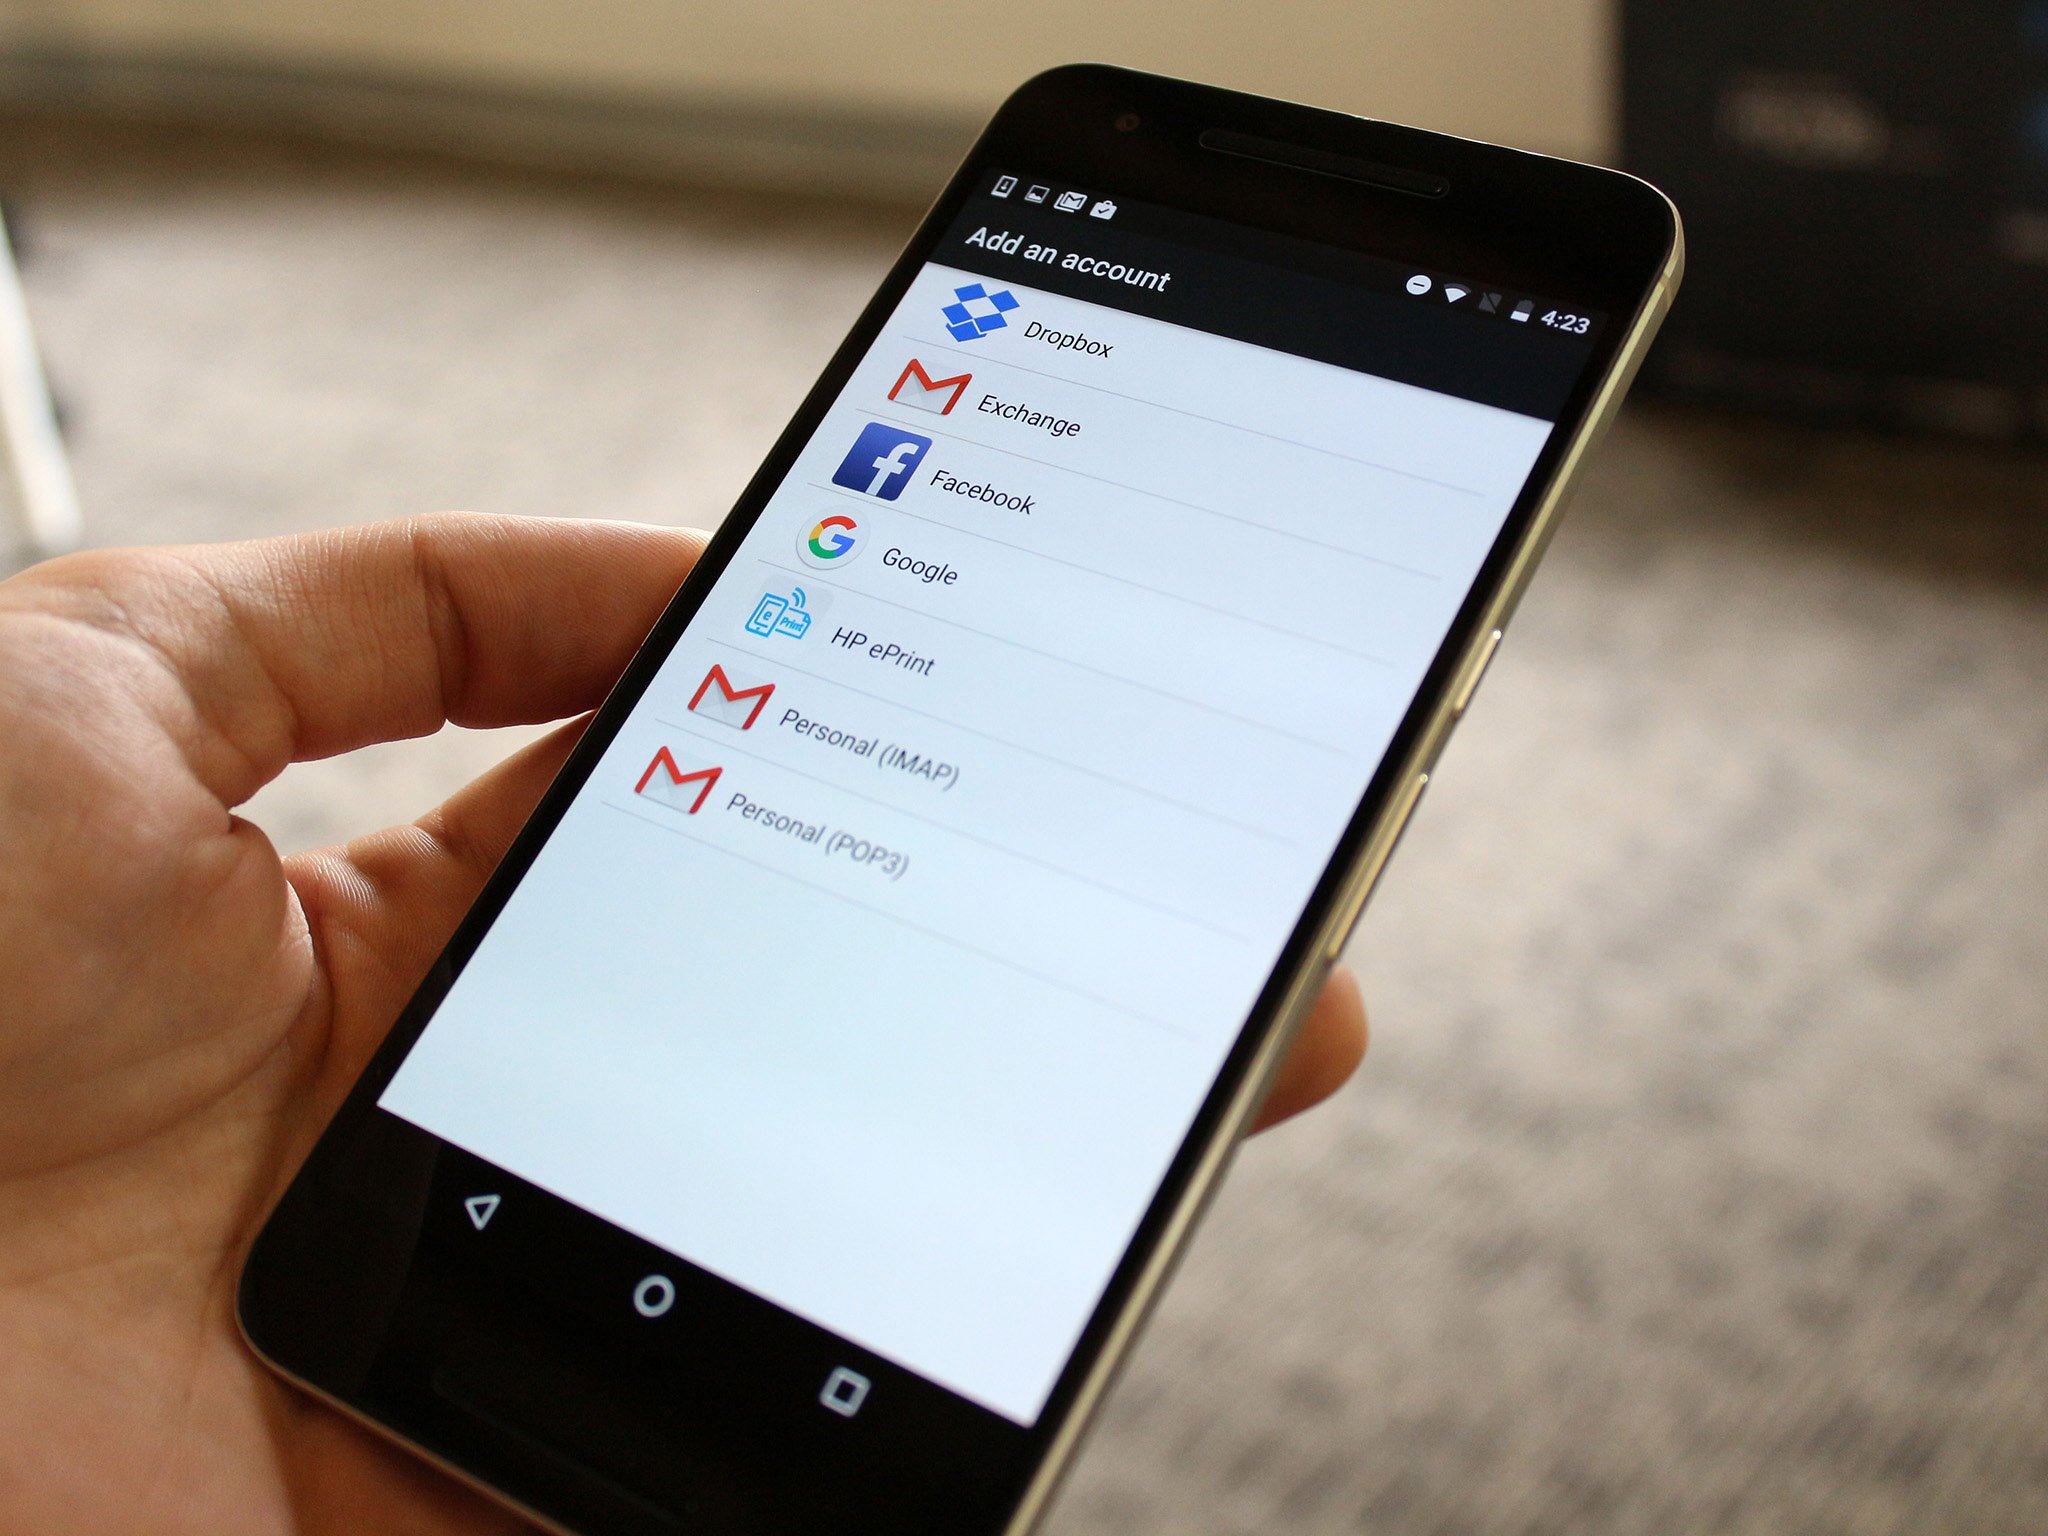 How to change google account in android phone